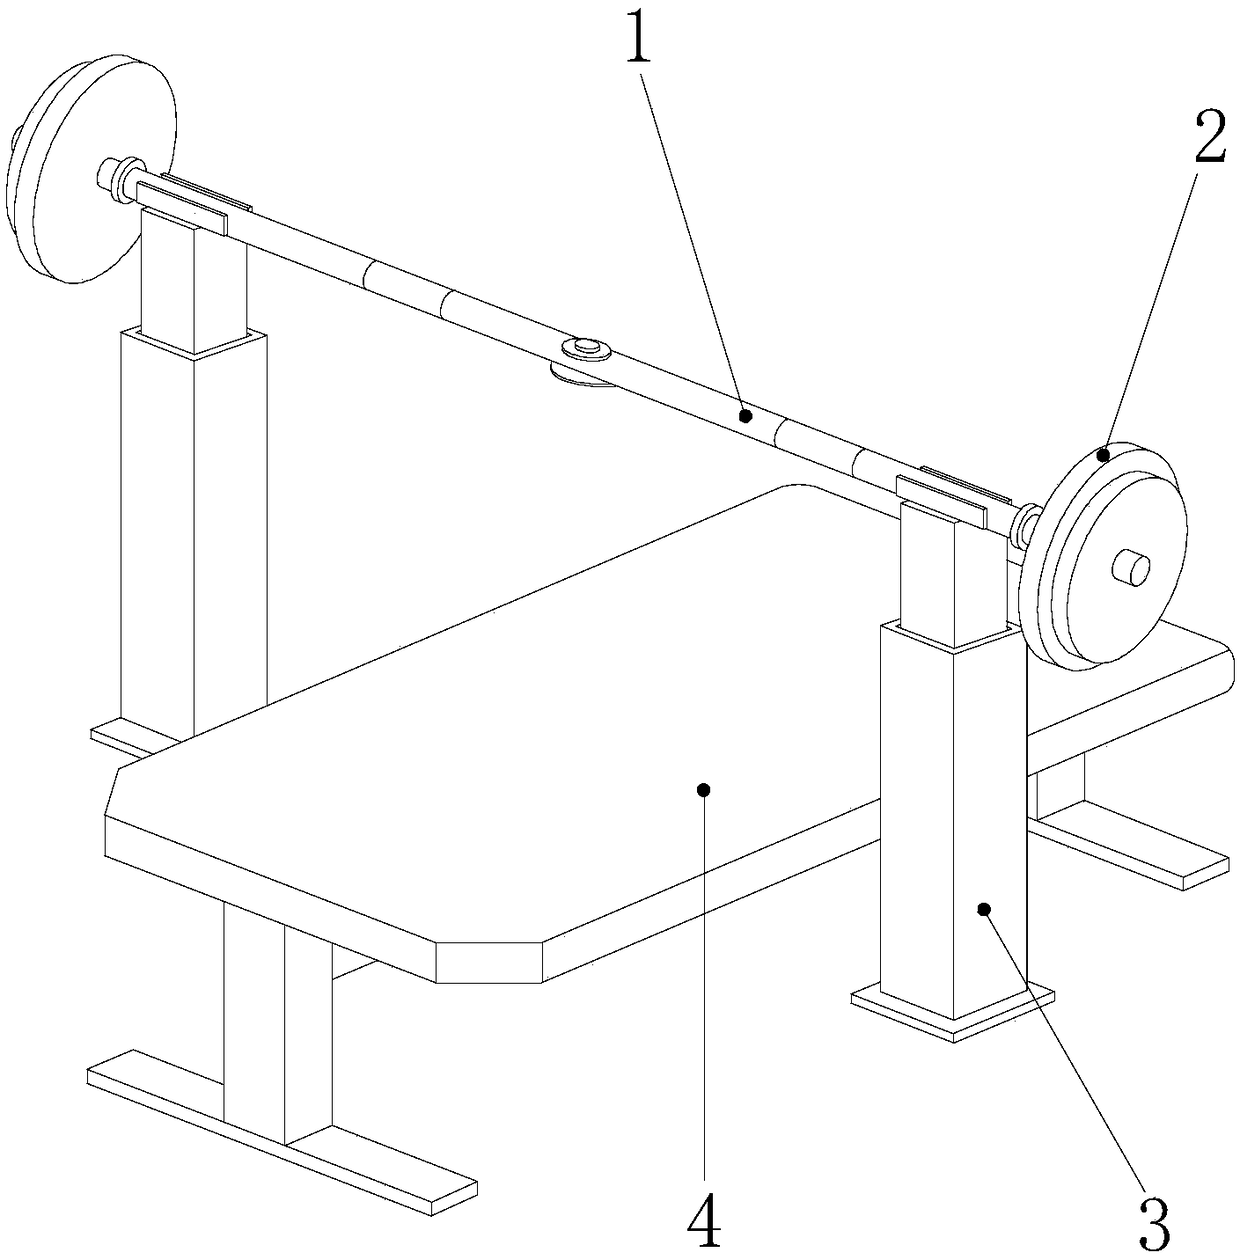 Barbell for integration of safety protection and training in bench press